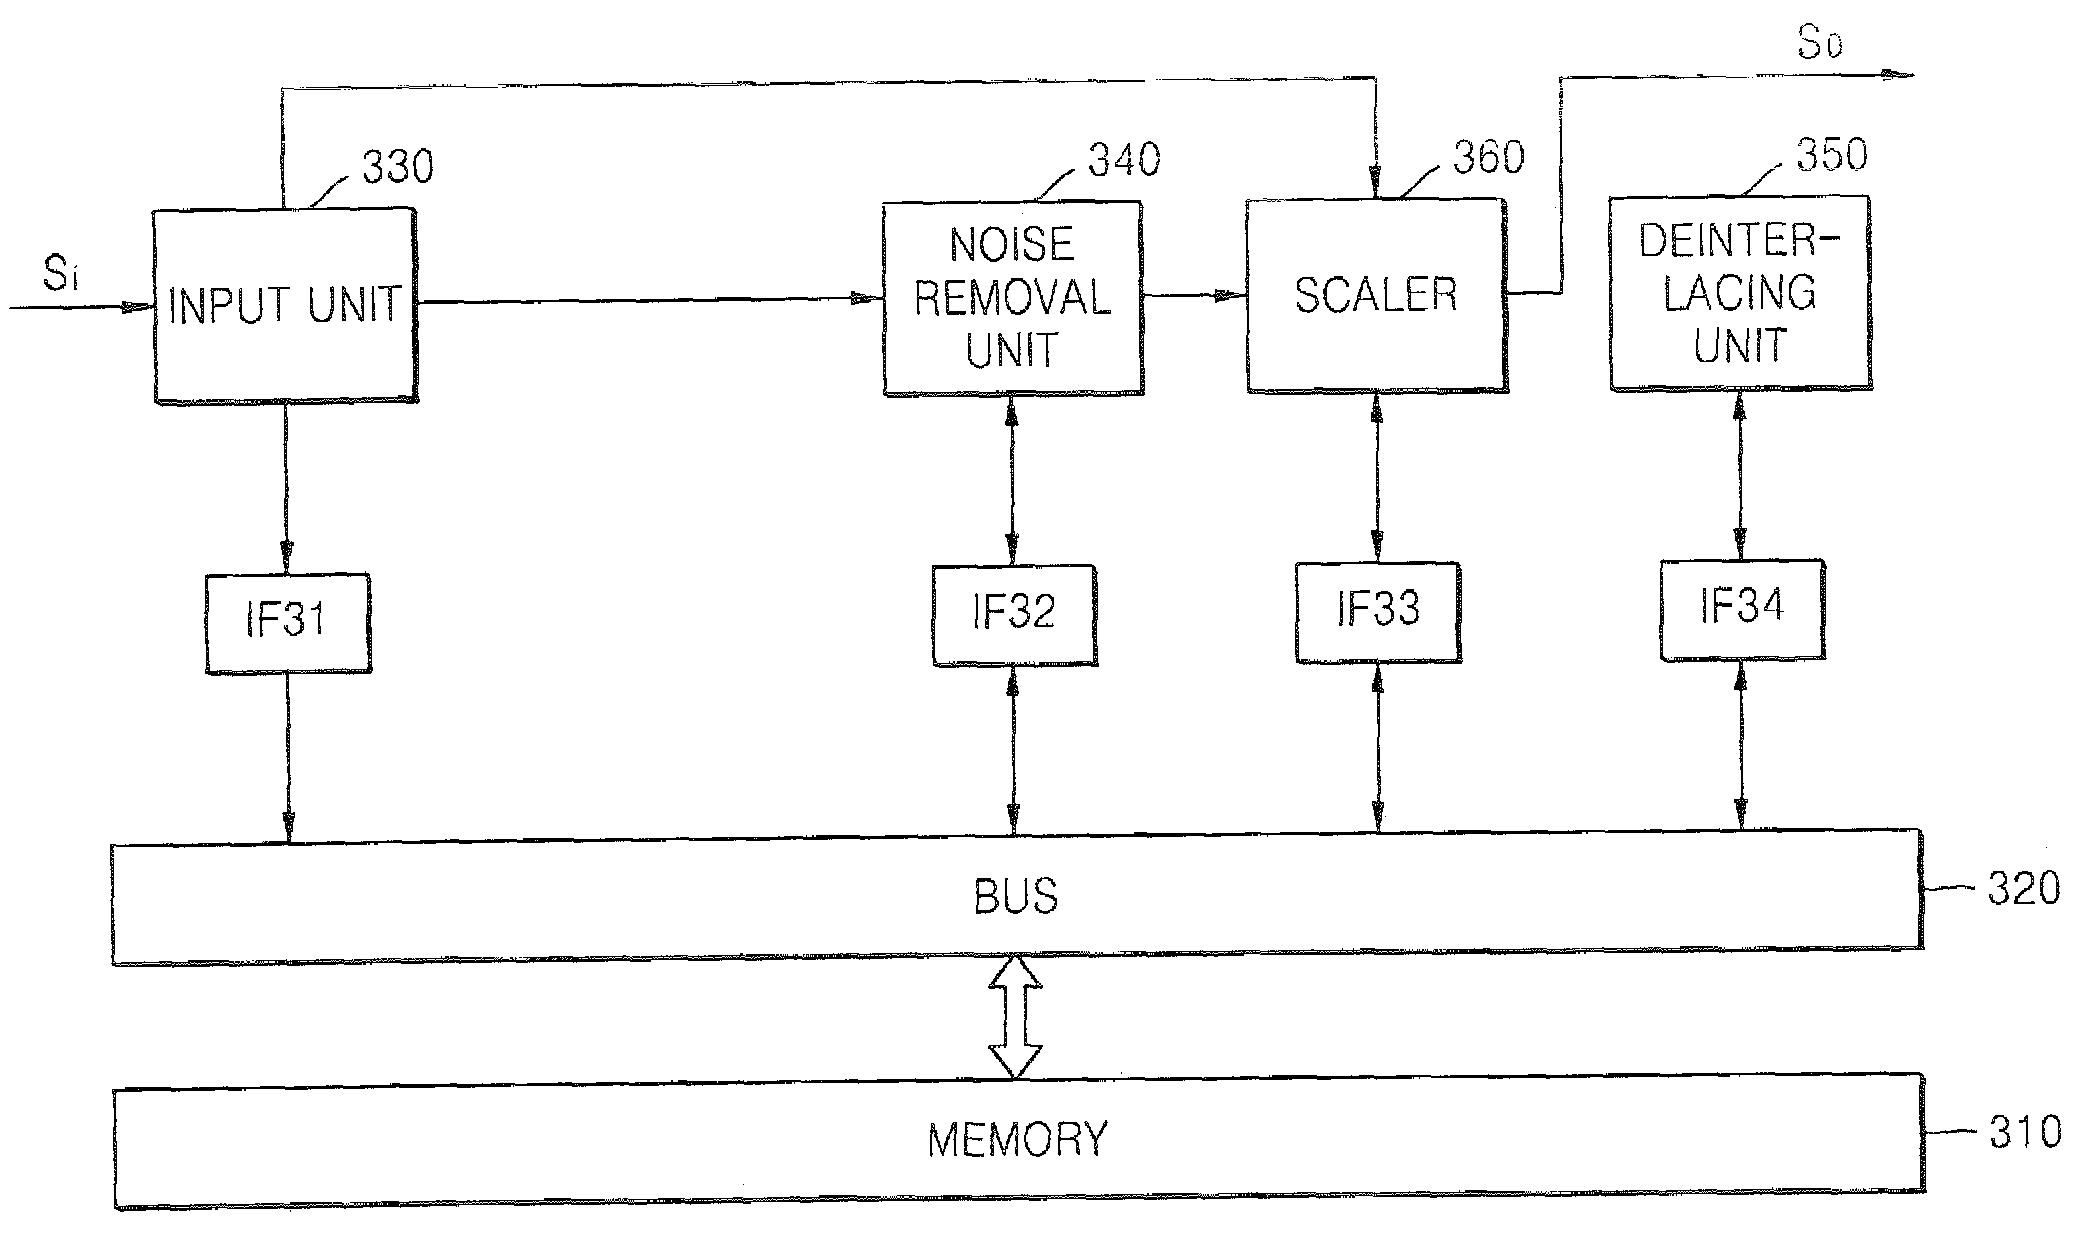 Apparatus and method for processing image signal without requiring high memory bandwidth